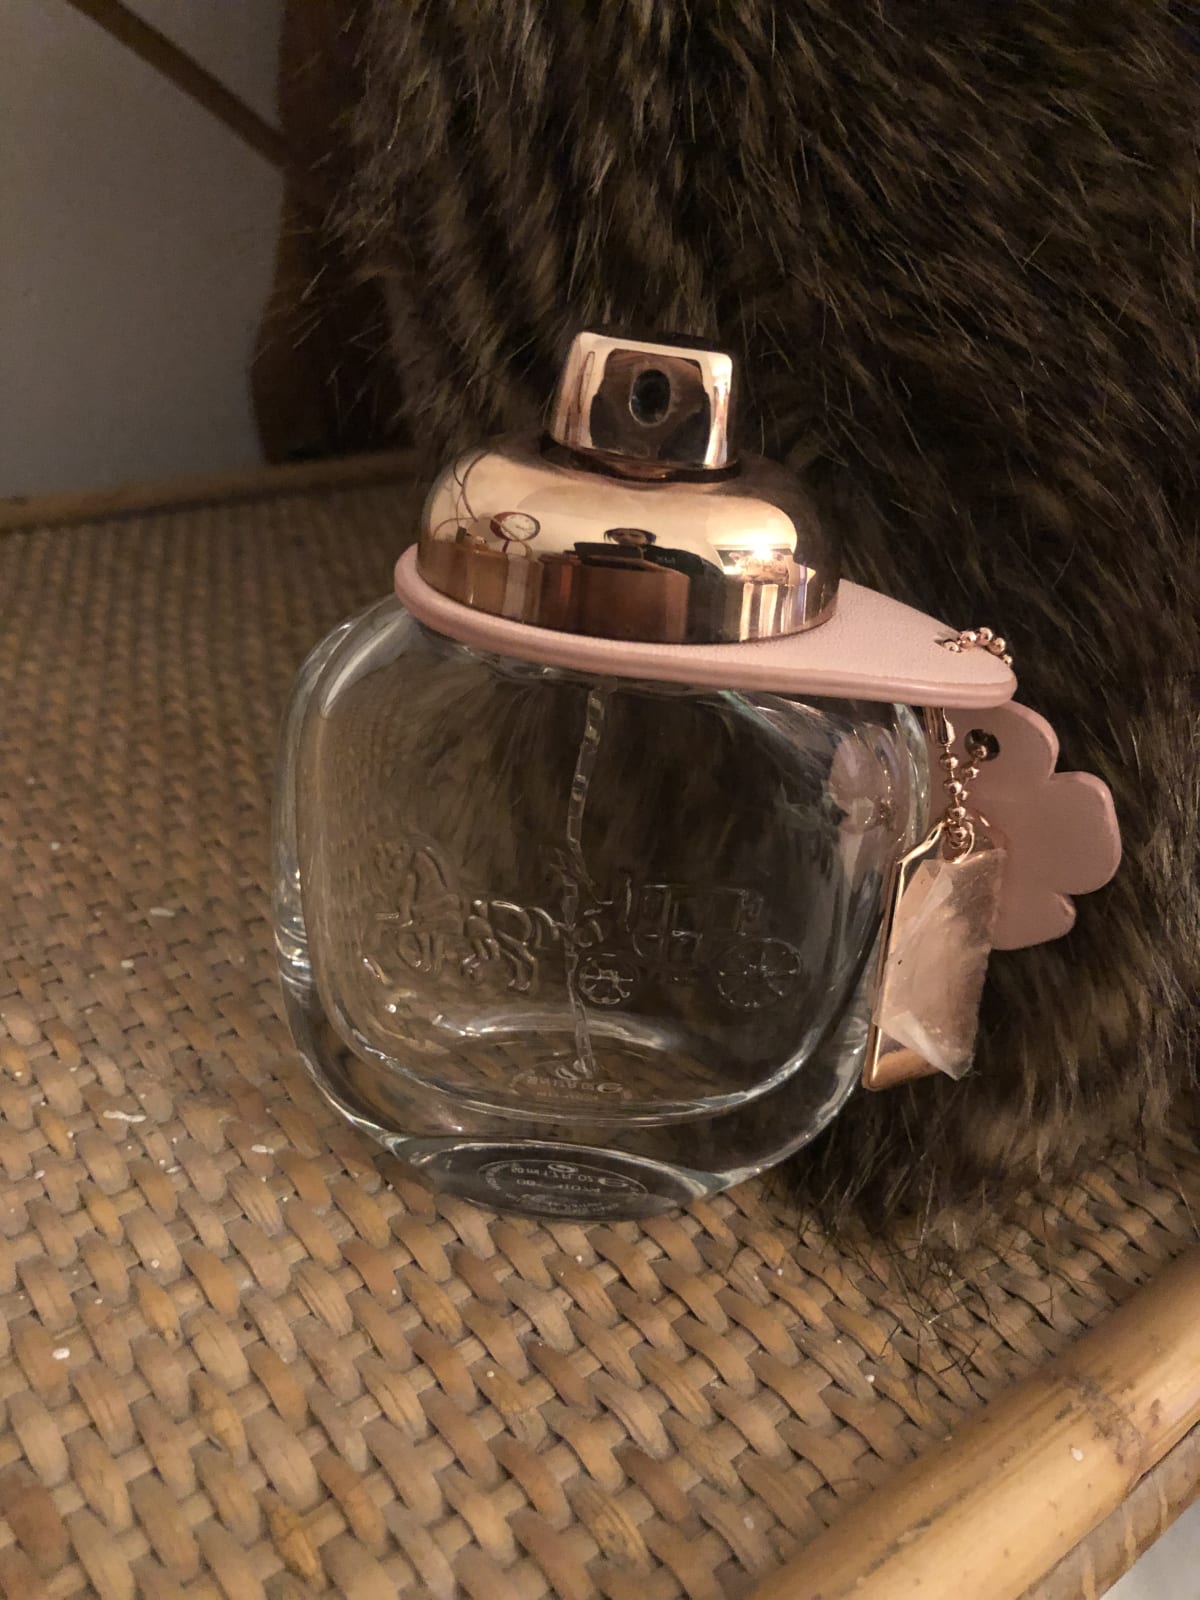 Coach Floral Edp Spray - review image